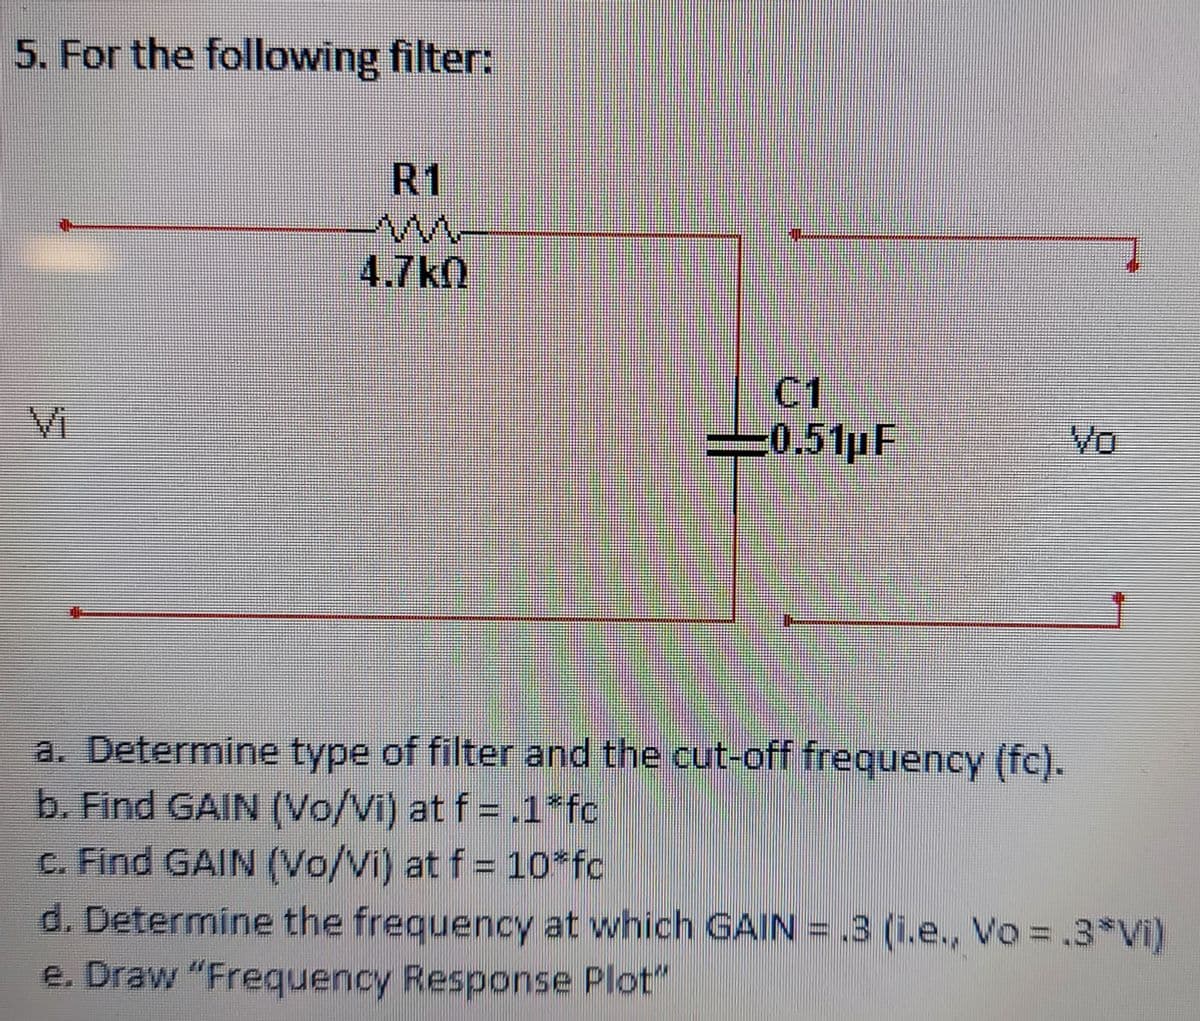 5. For the following filter:
R1
4.7kn
C1
0.51pF
Vi
Vo
a. Determine type of filter and the cut-off frequency (fc).
b. Find GAIN (Vo/Vi) at f = .1*fc
c. Find GAIN (Vo/Vi) at f = 10fc
d. Determine the frequency at which GAIN = .3 (i.e., Vo =.3*Vi)
e. Draw "Frequency Response Plot"
